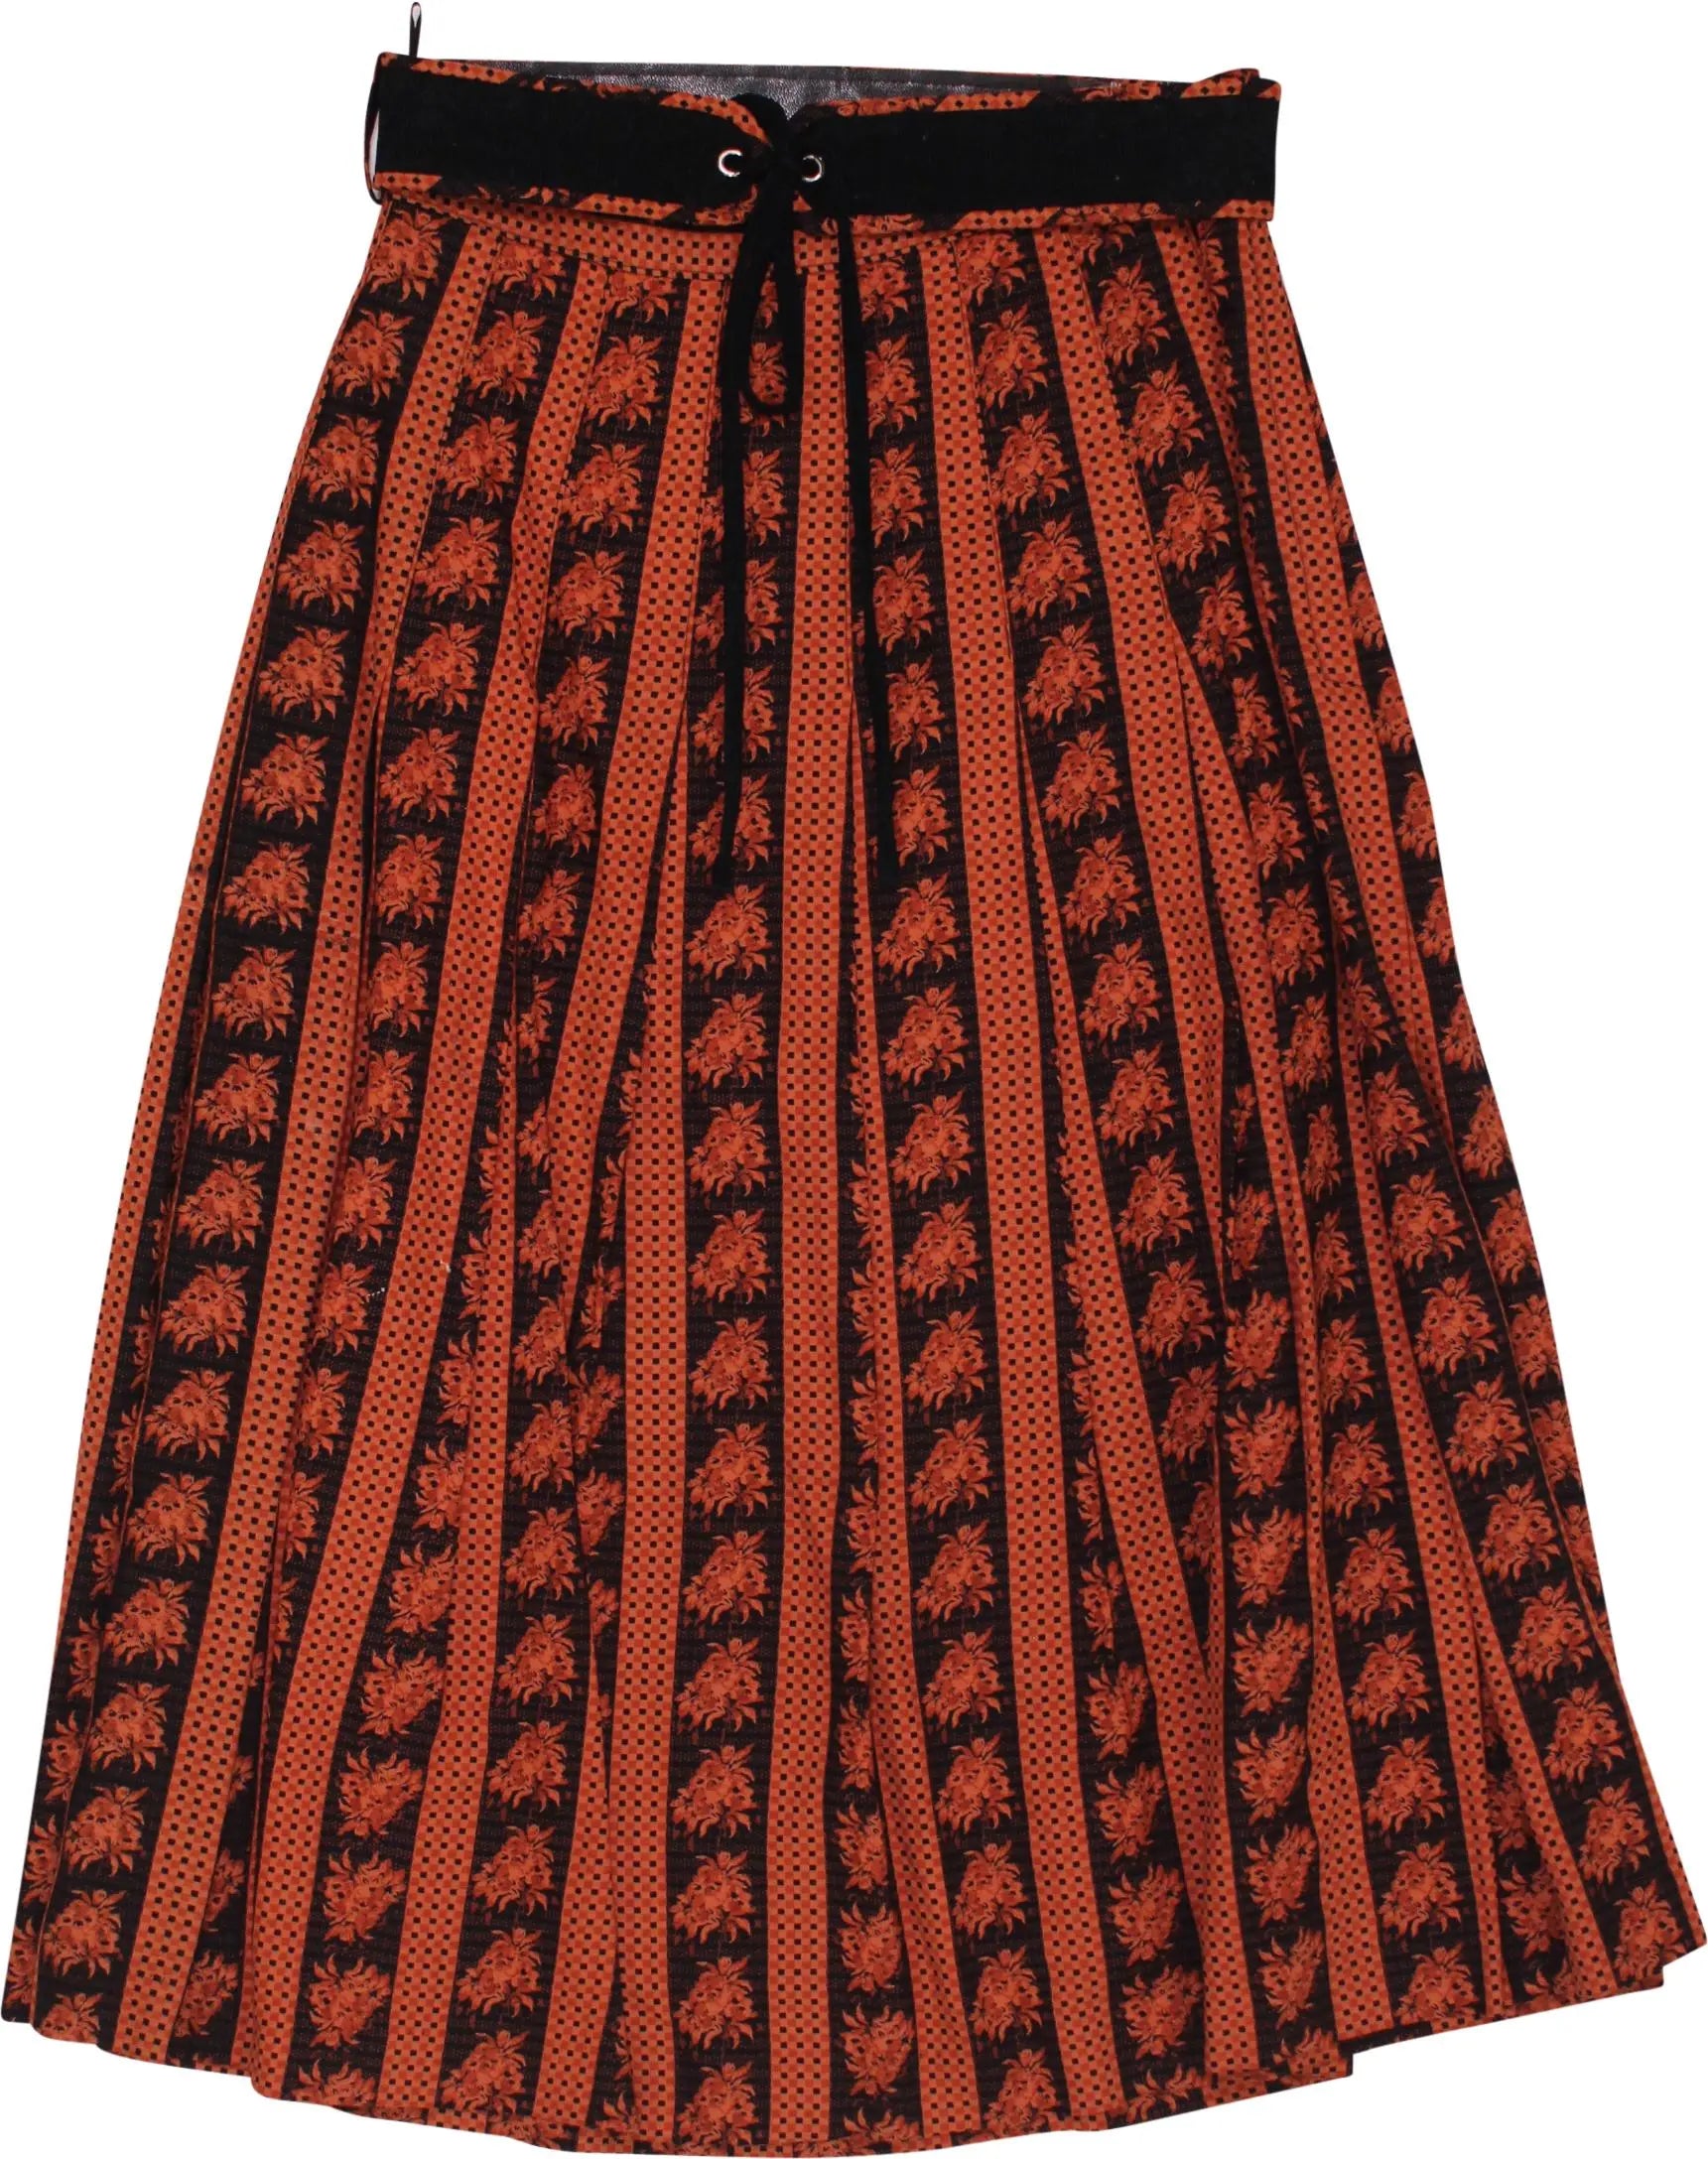 Unknown - Folklore Pleated Skirt- ThriftTale.com - Vintage and second handclothing